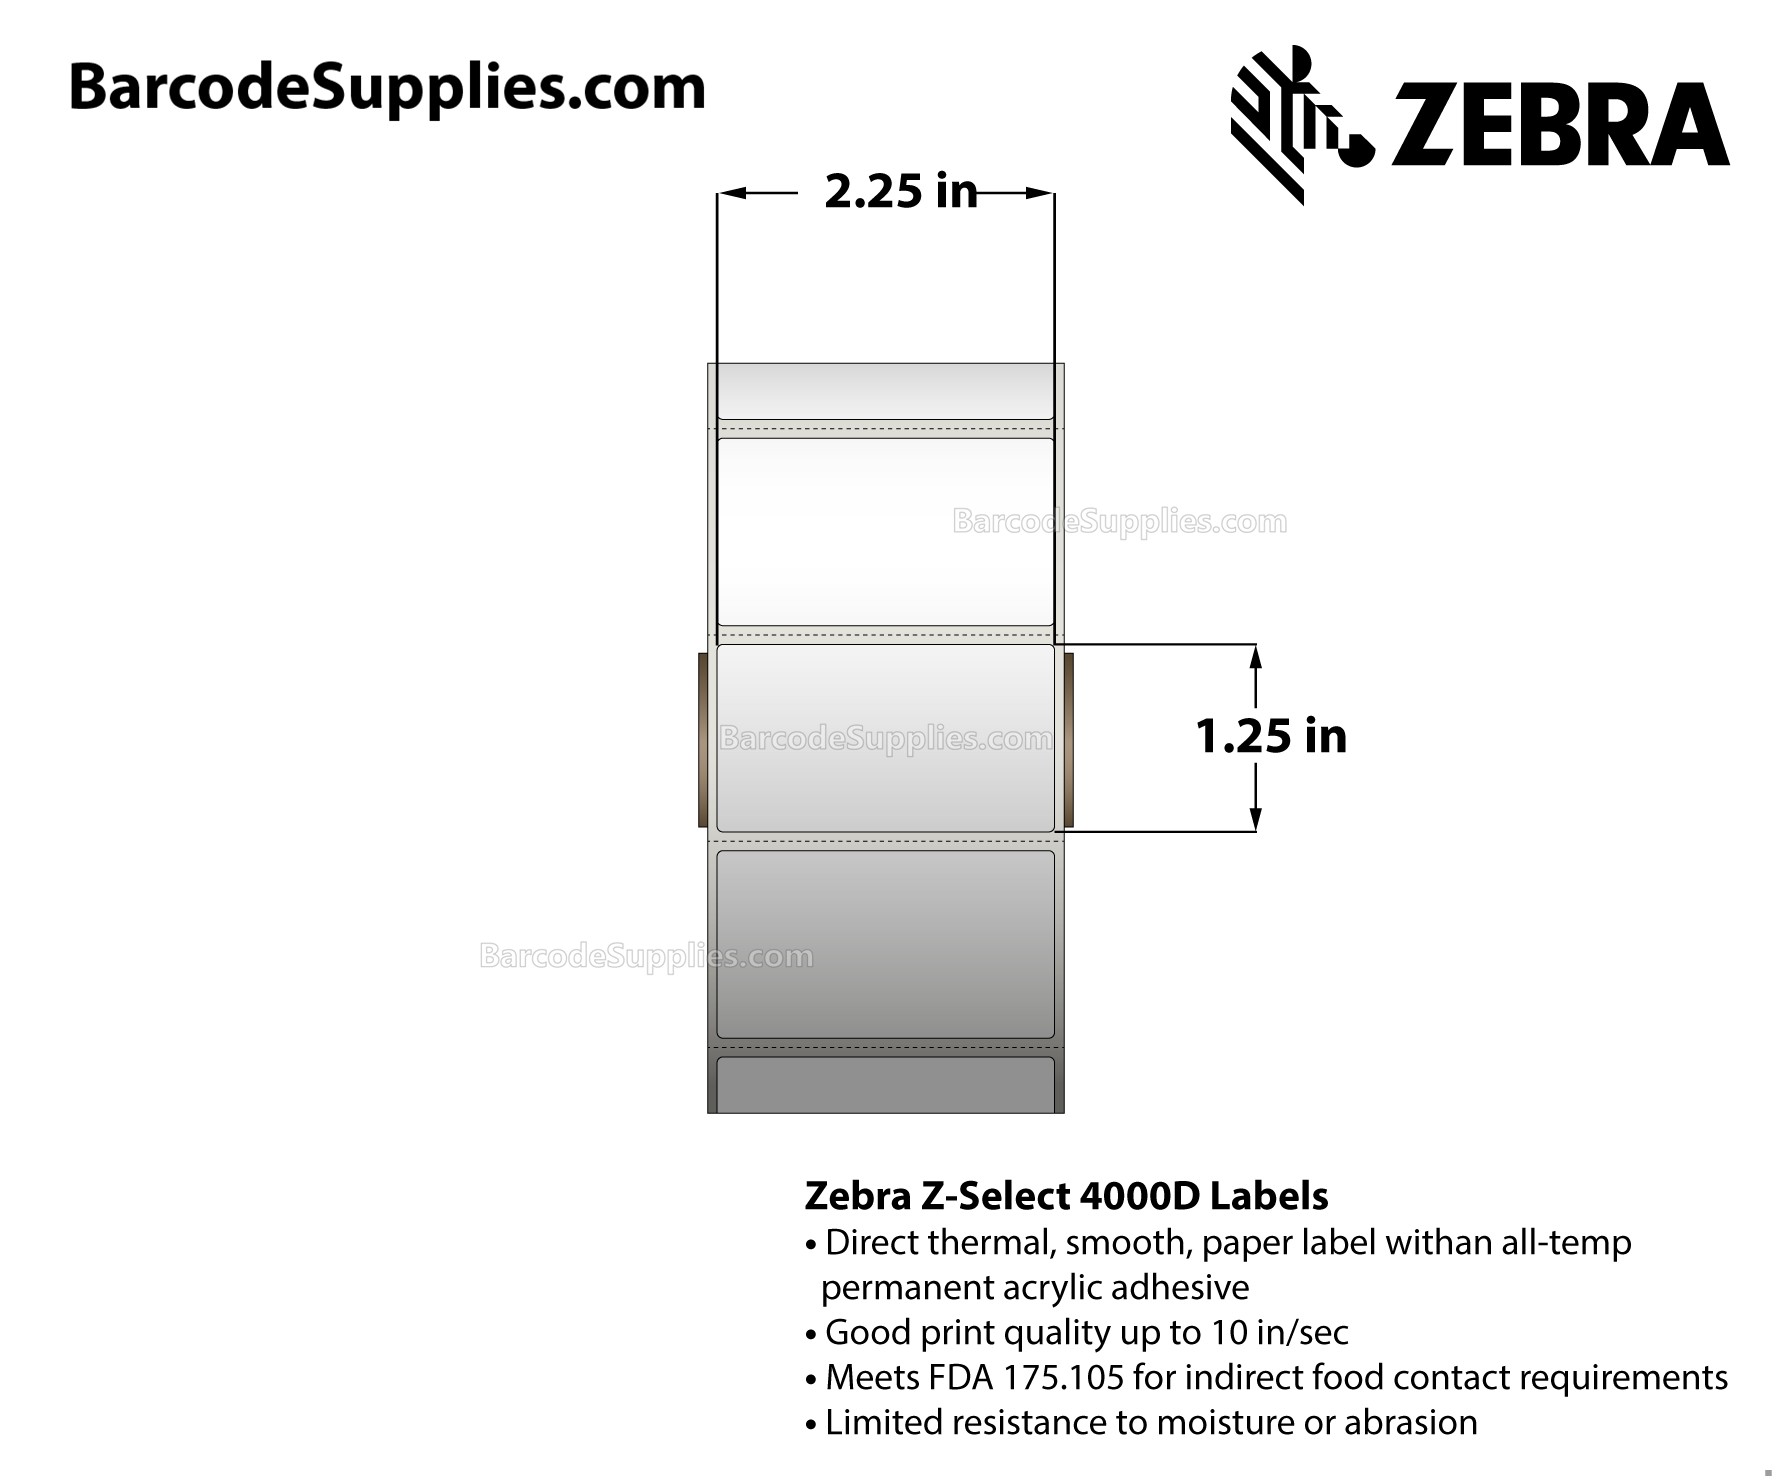 2.25 x 1.25 Direct Thermal White Z-Select 4000D Labels With Permanent Adhesive - Perforated - 2100 Labels Per Roll - Carton Of 12 Rolls - 25200 Labels Total - MPN: 10015341